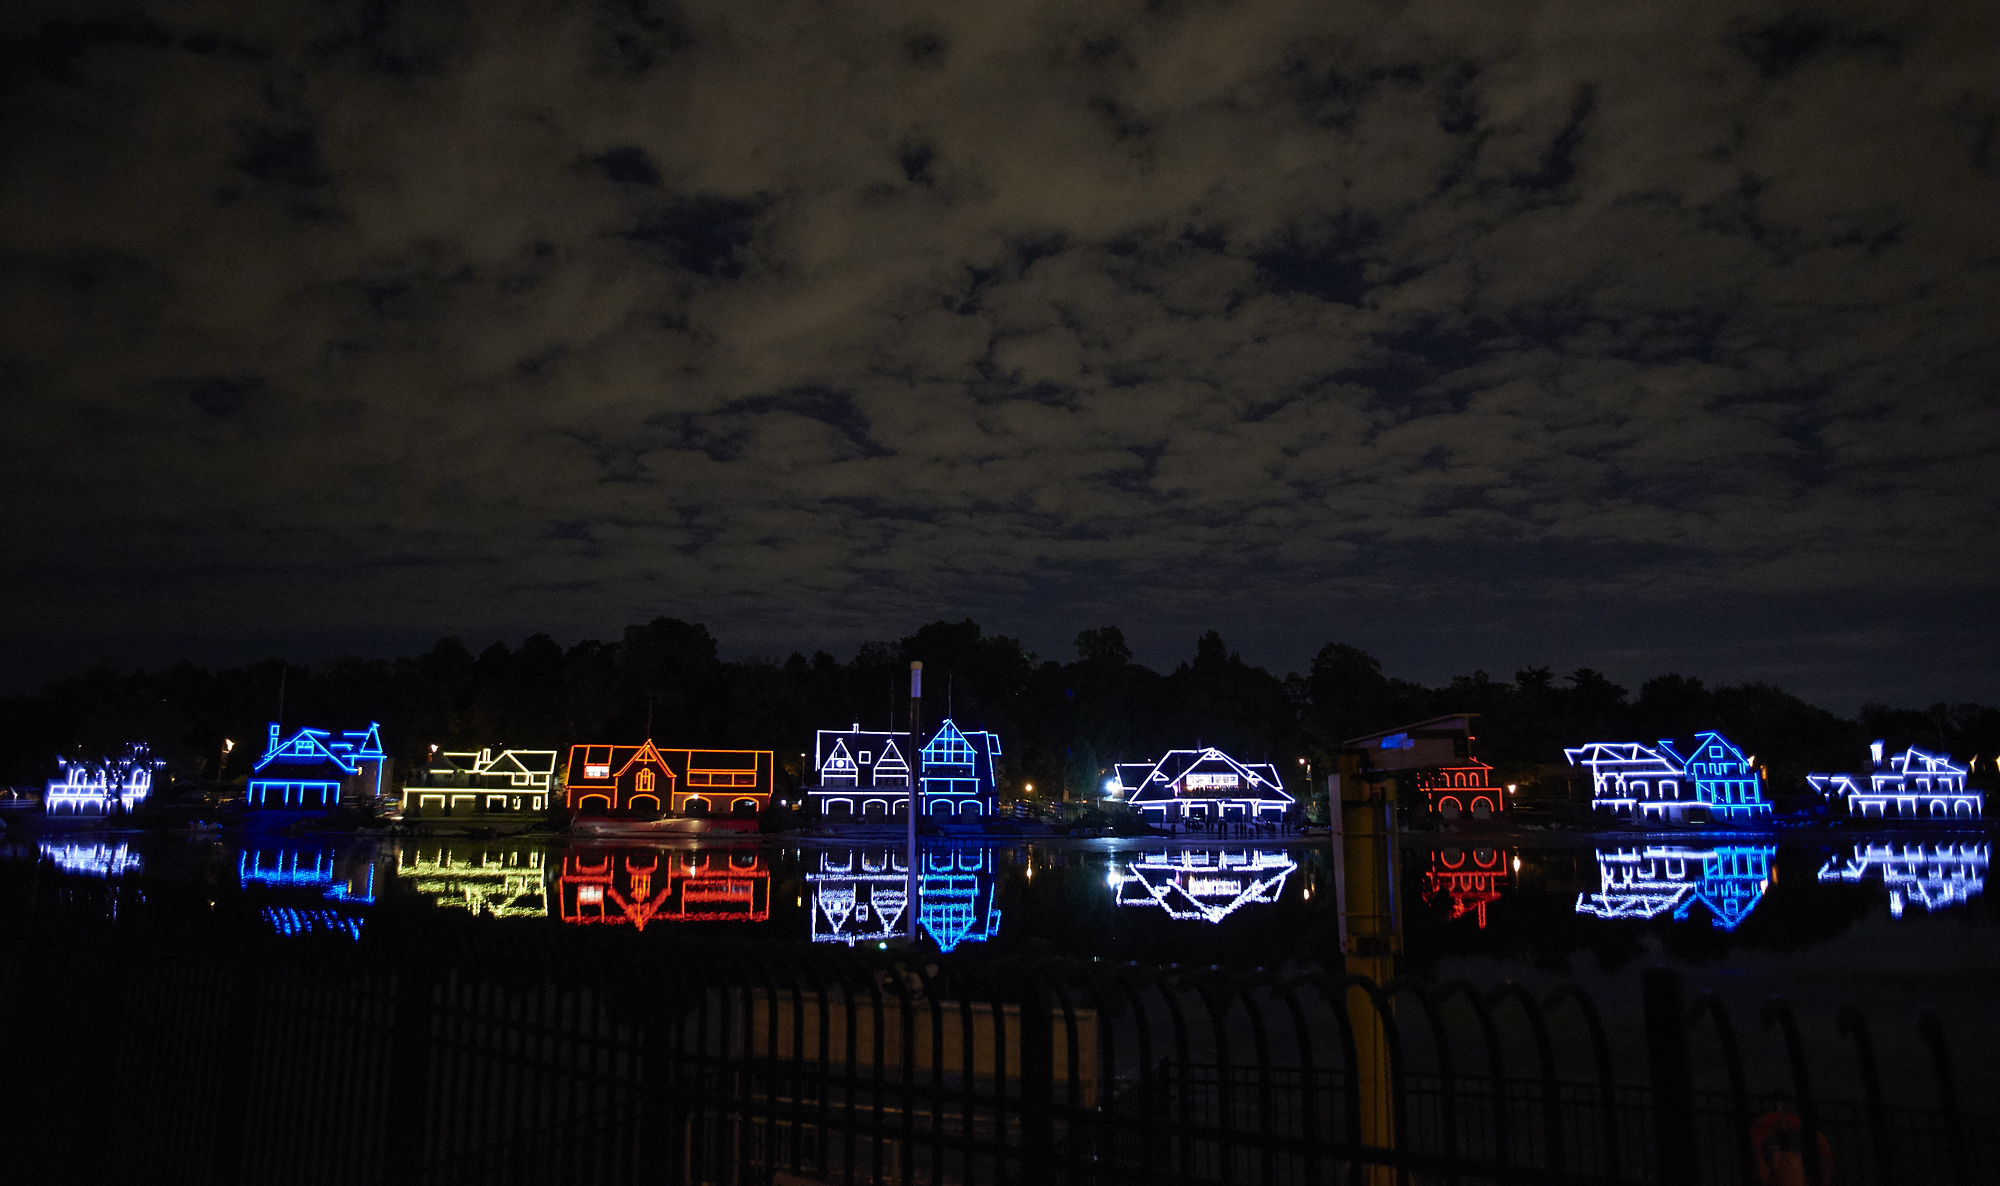 Why are the Boathouse Row lights out? Upgrades are underway